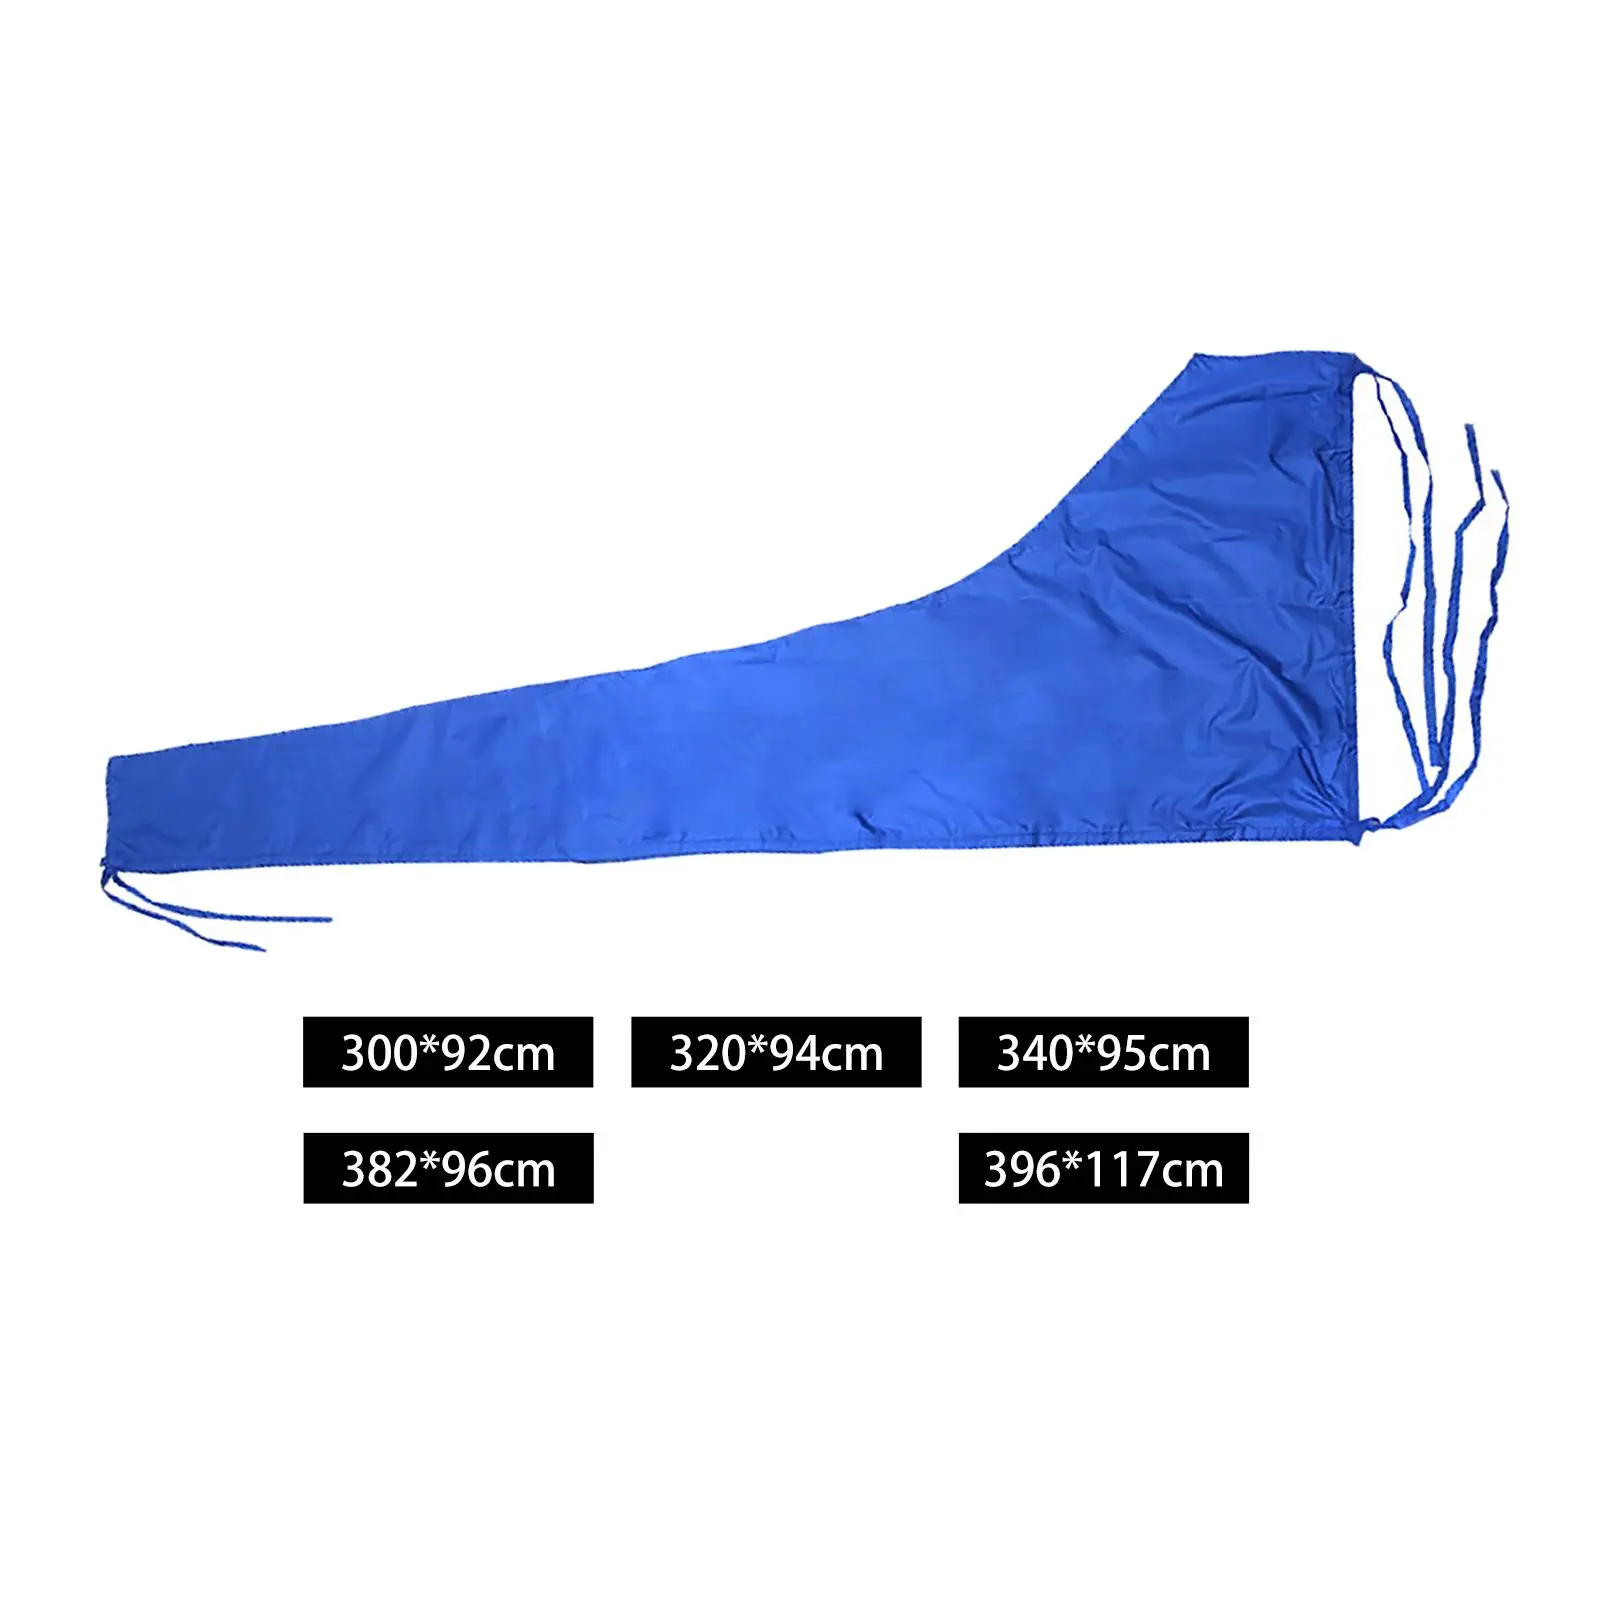 600D Mainsail boom cover, boat cover, dust cover Sail cover Snow cover Seamless